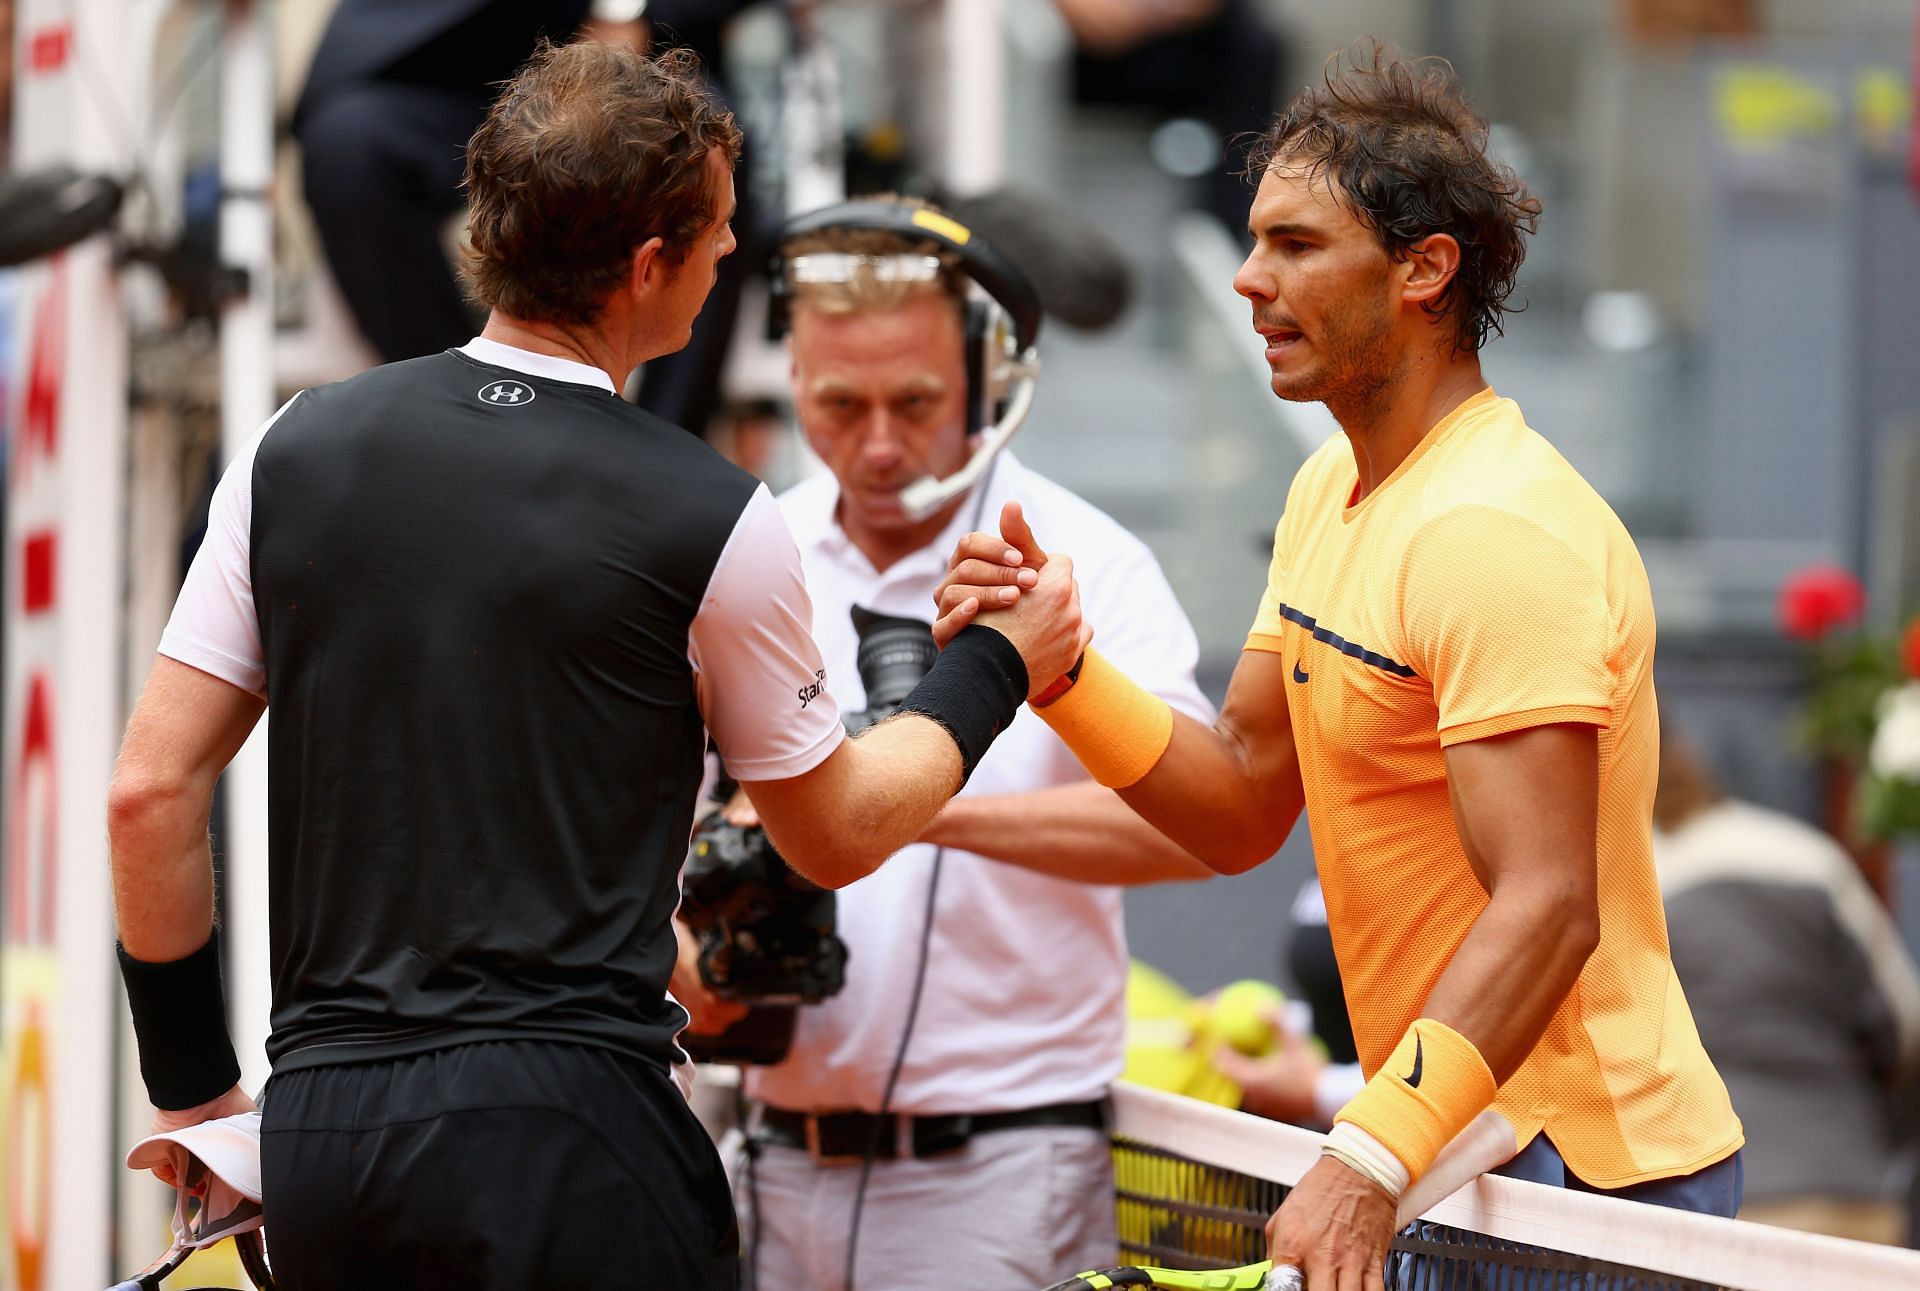 The Scotsman and the Spaniard at the Mutua Madrid Open